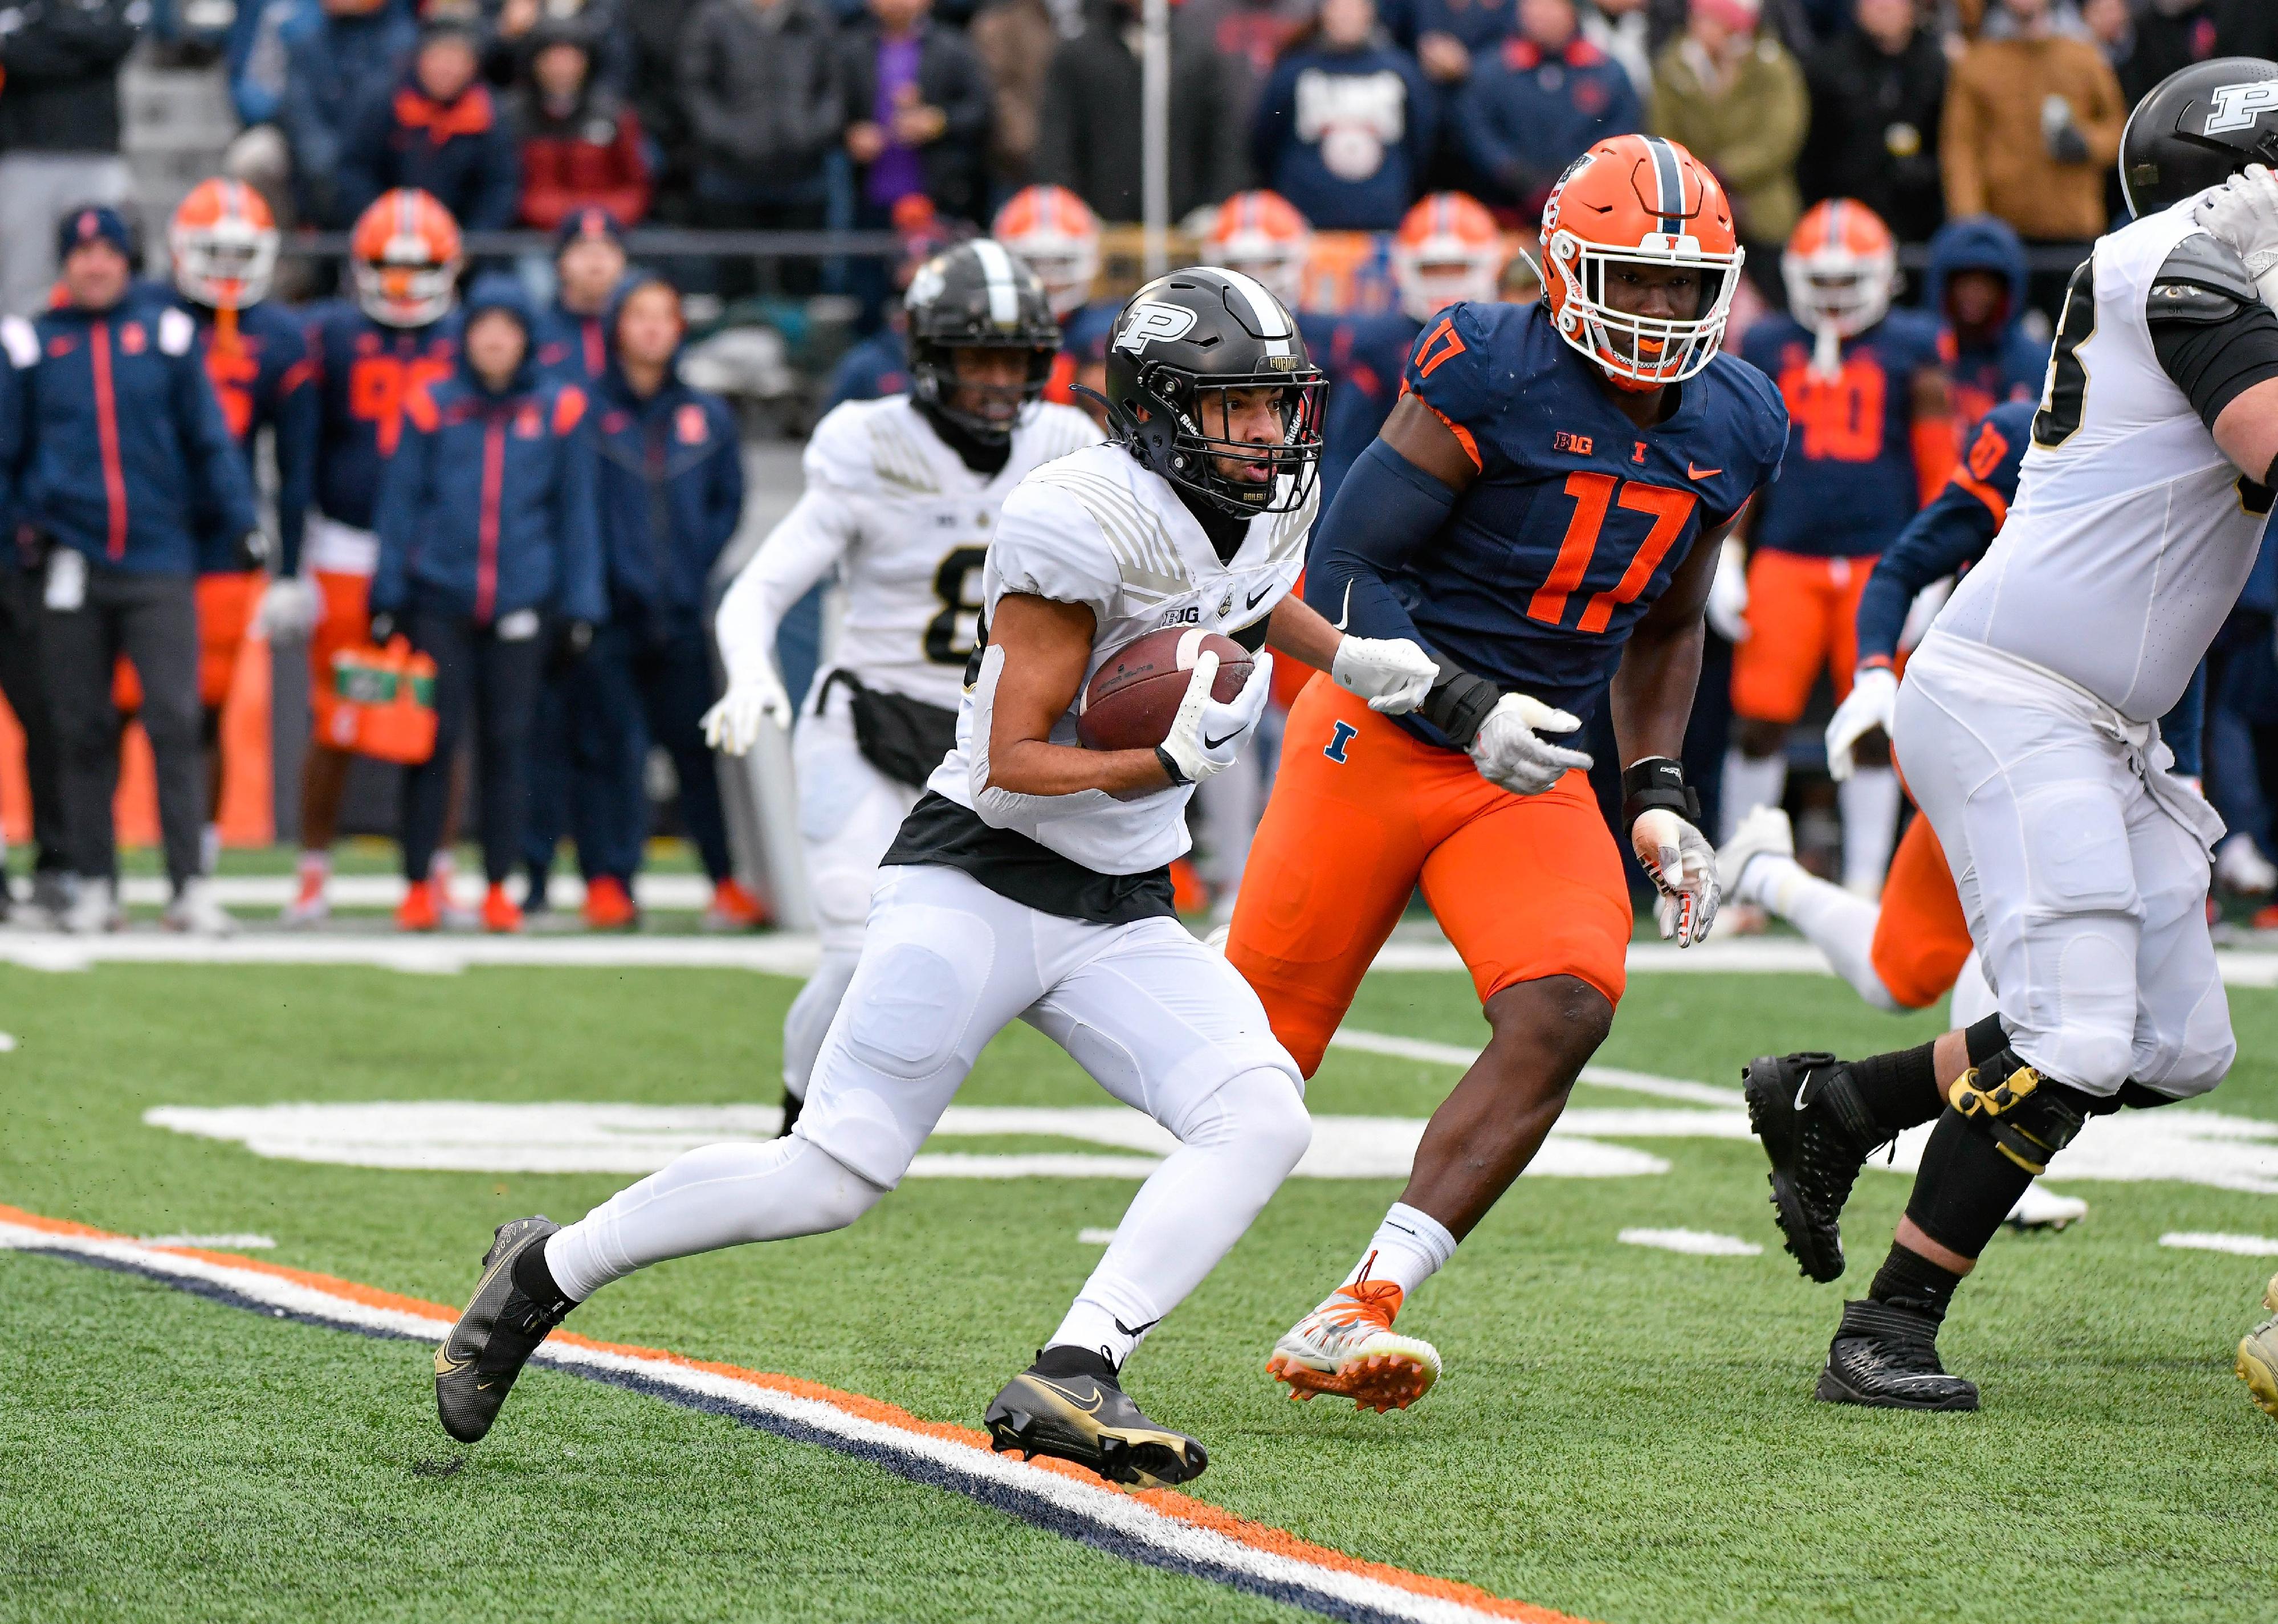 Devin Mockobee runs with the ball during a game between Purdue and Illinois.